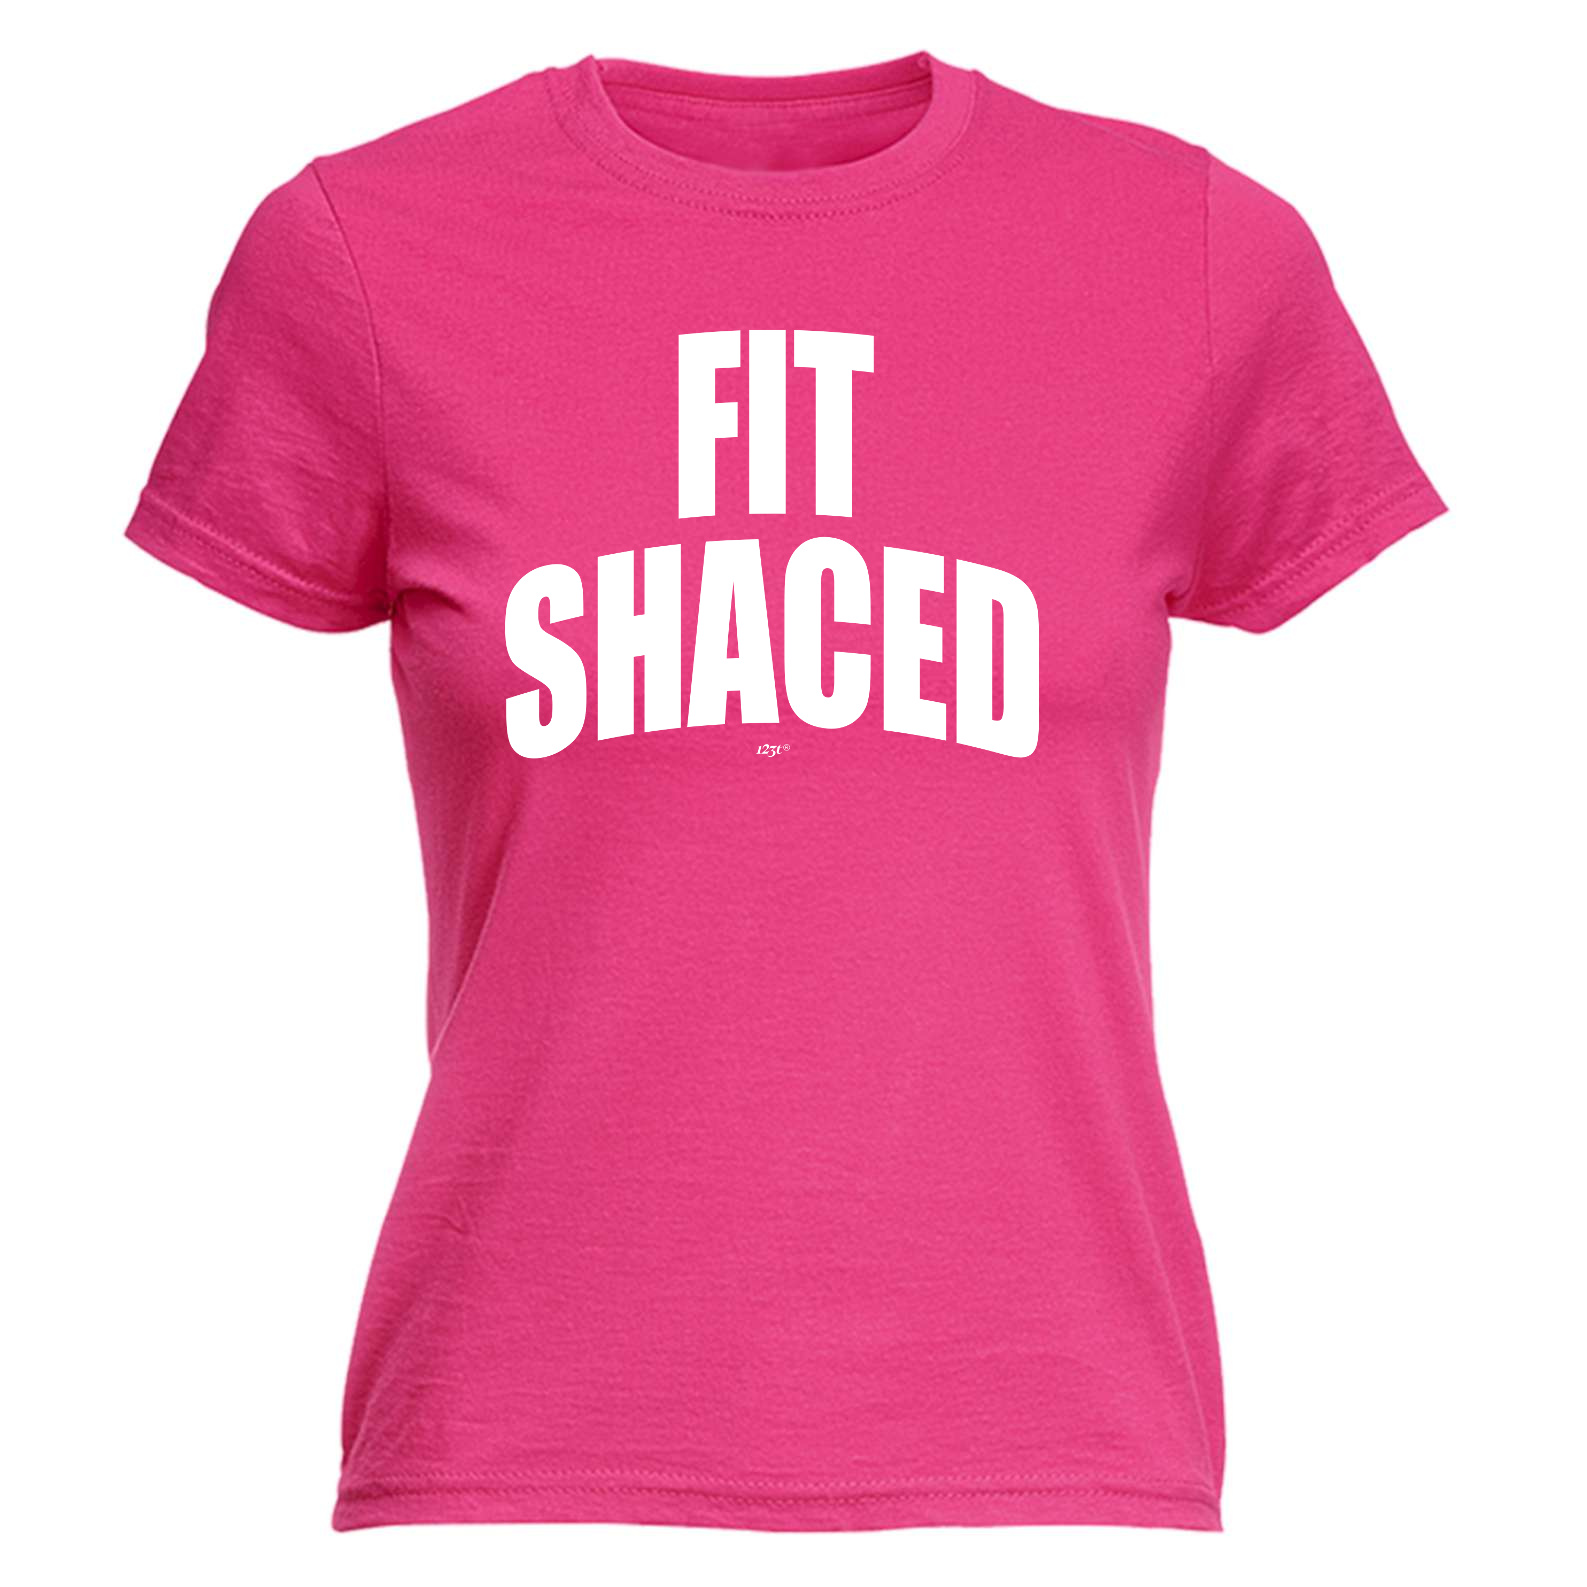 Funny Novelty Tops T-Shirt Womens tee TShirt Fit Shaced 